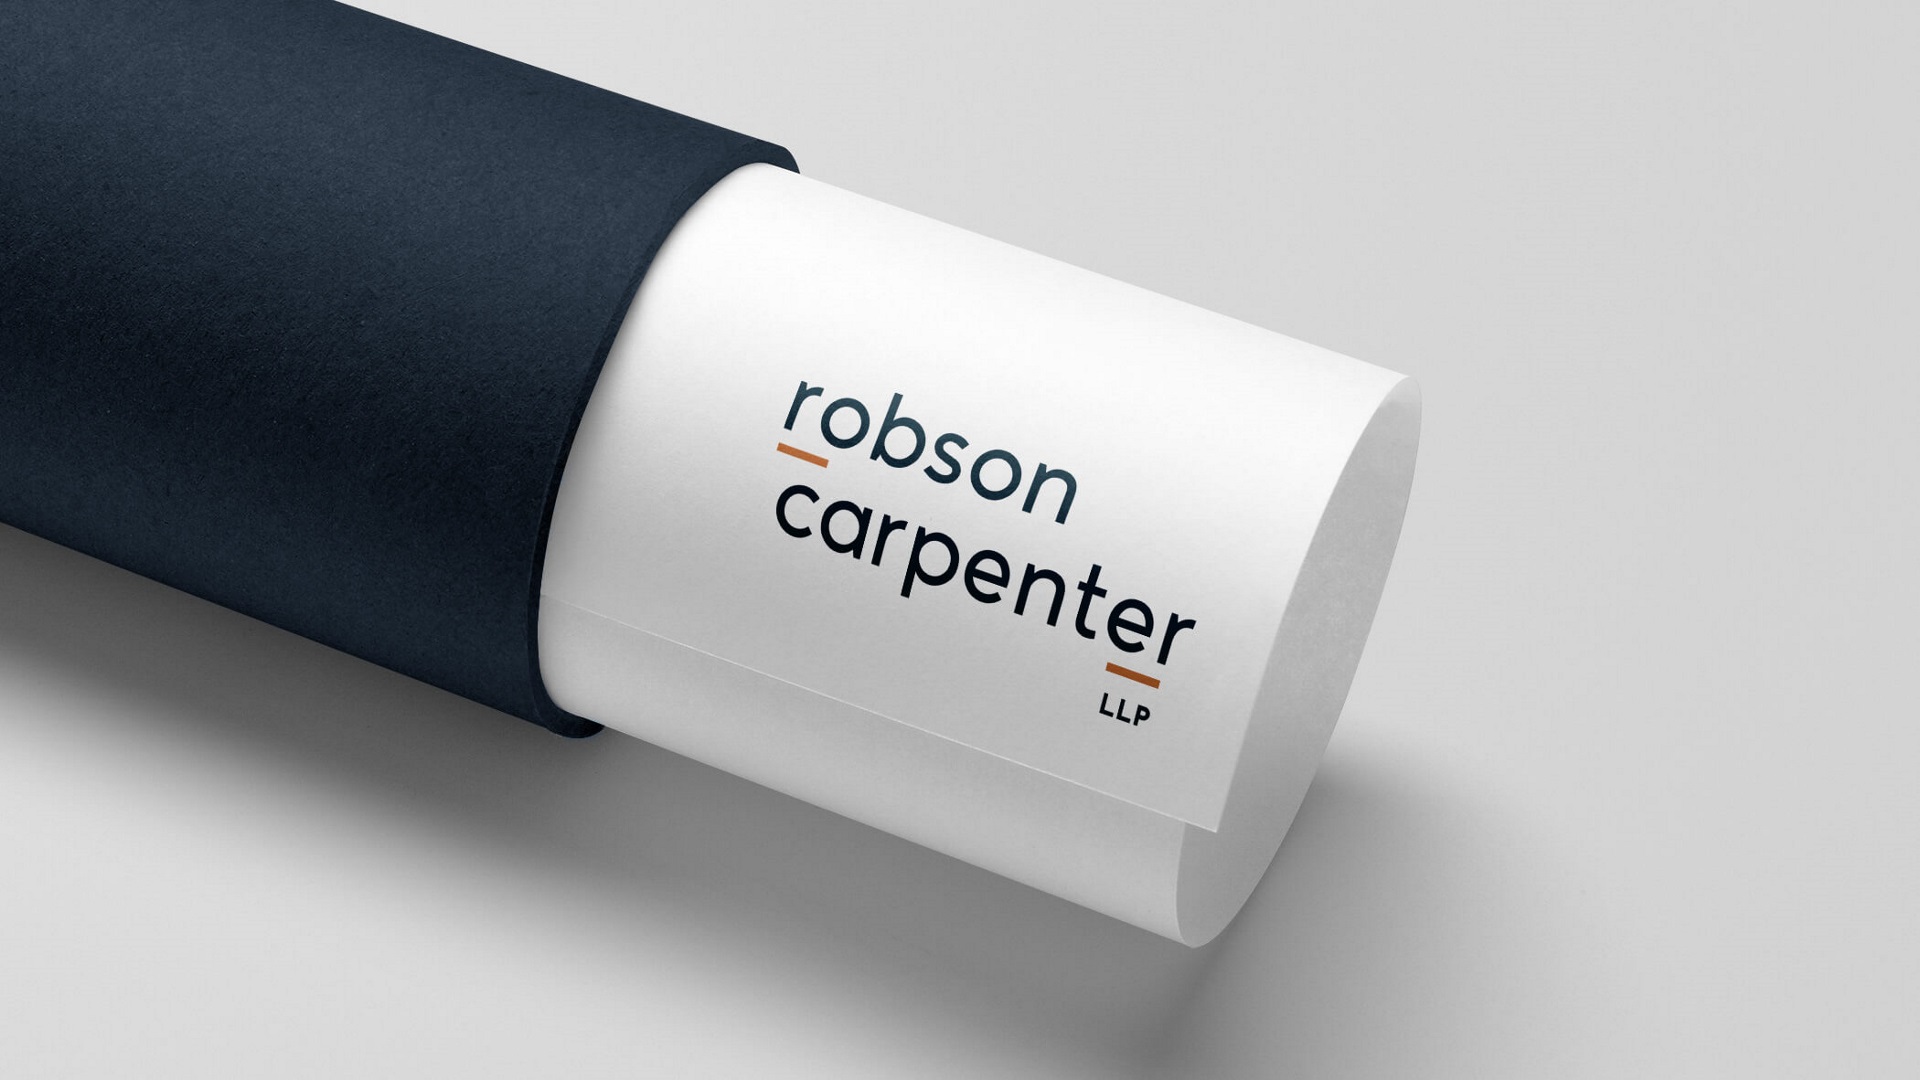  - Link to Robson Carpenter LLP